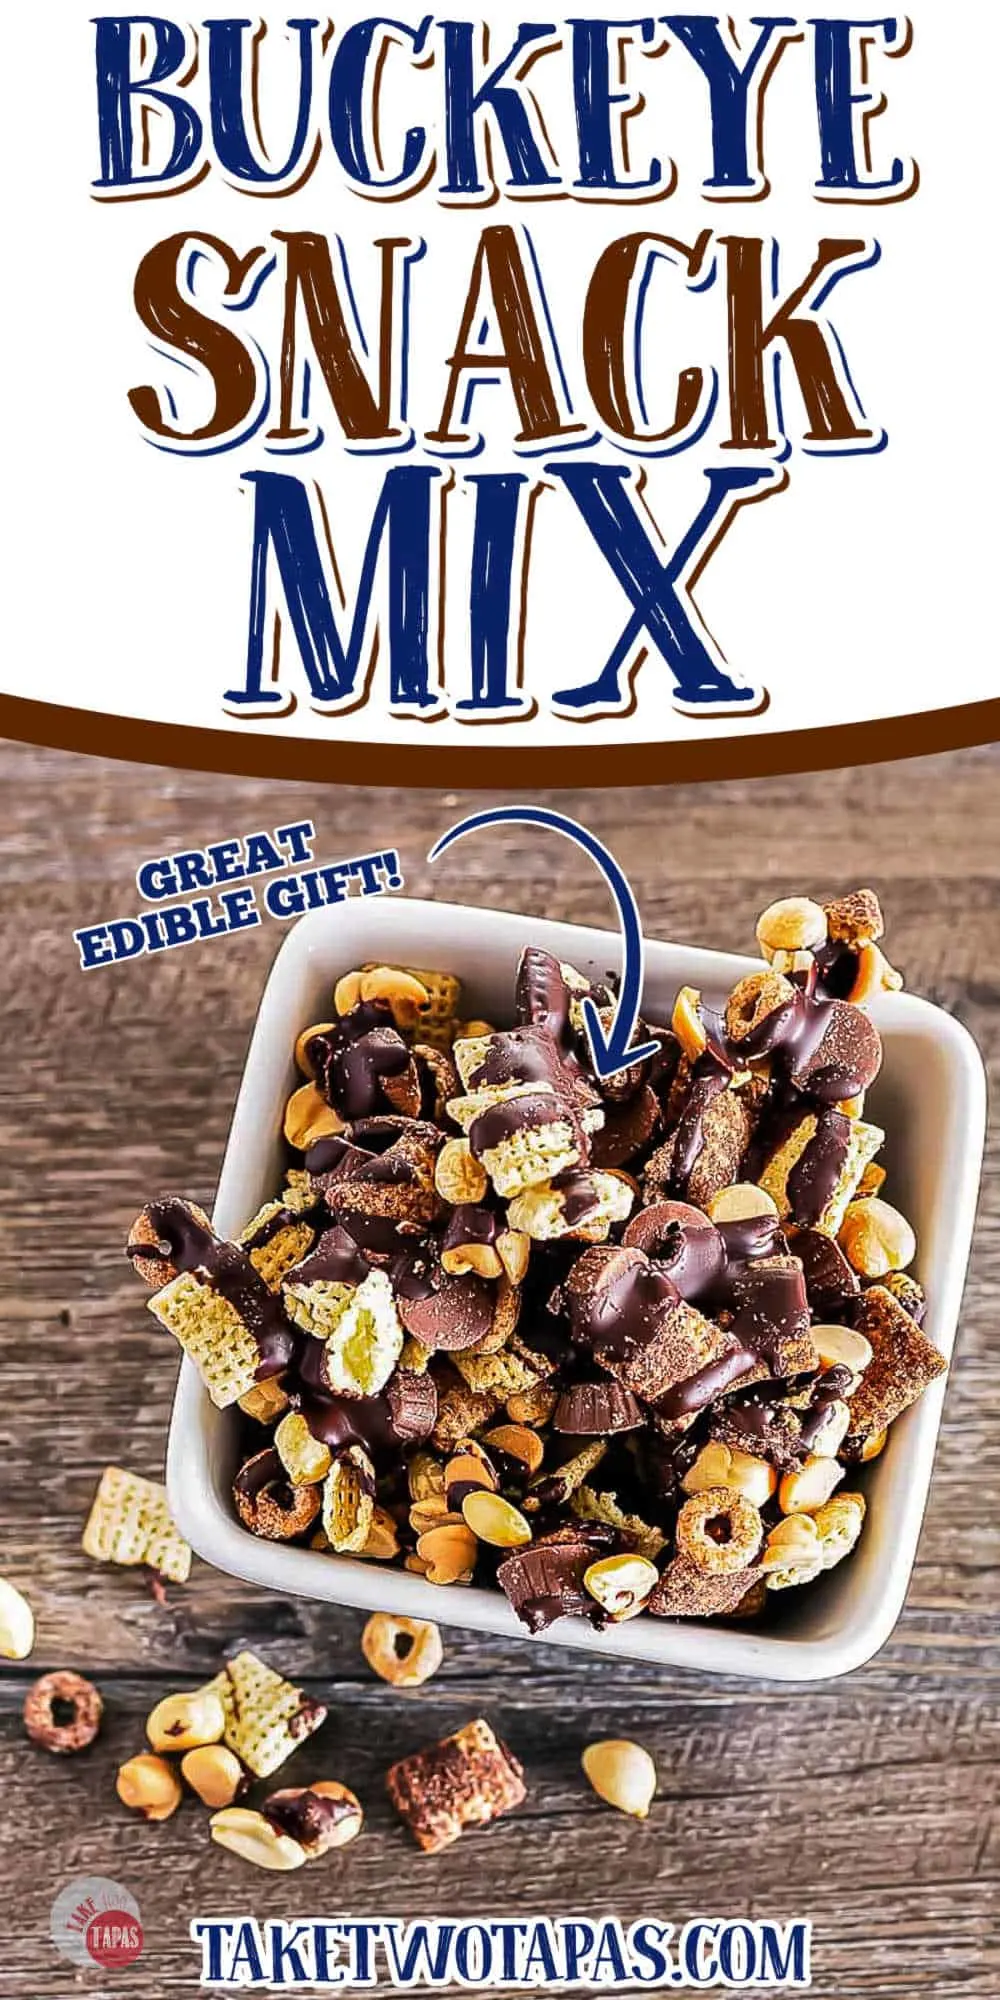 close up of chocolate chex mix with text "buckeye snack mix"